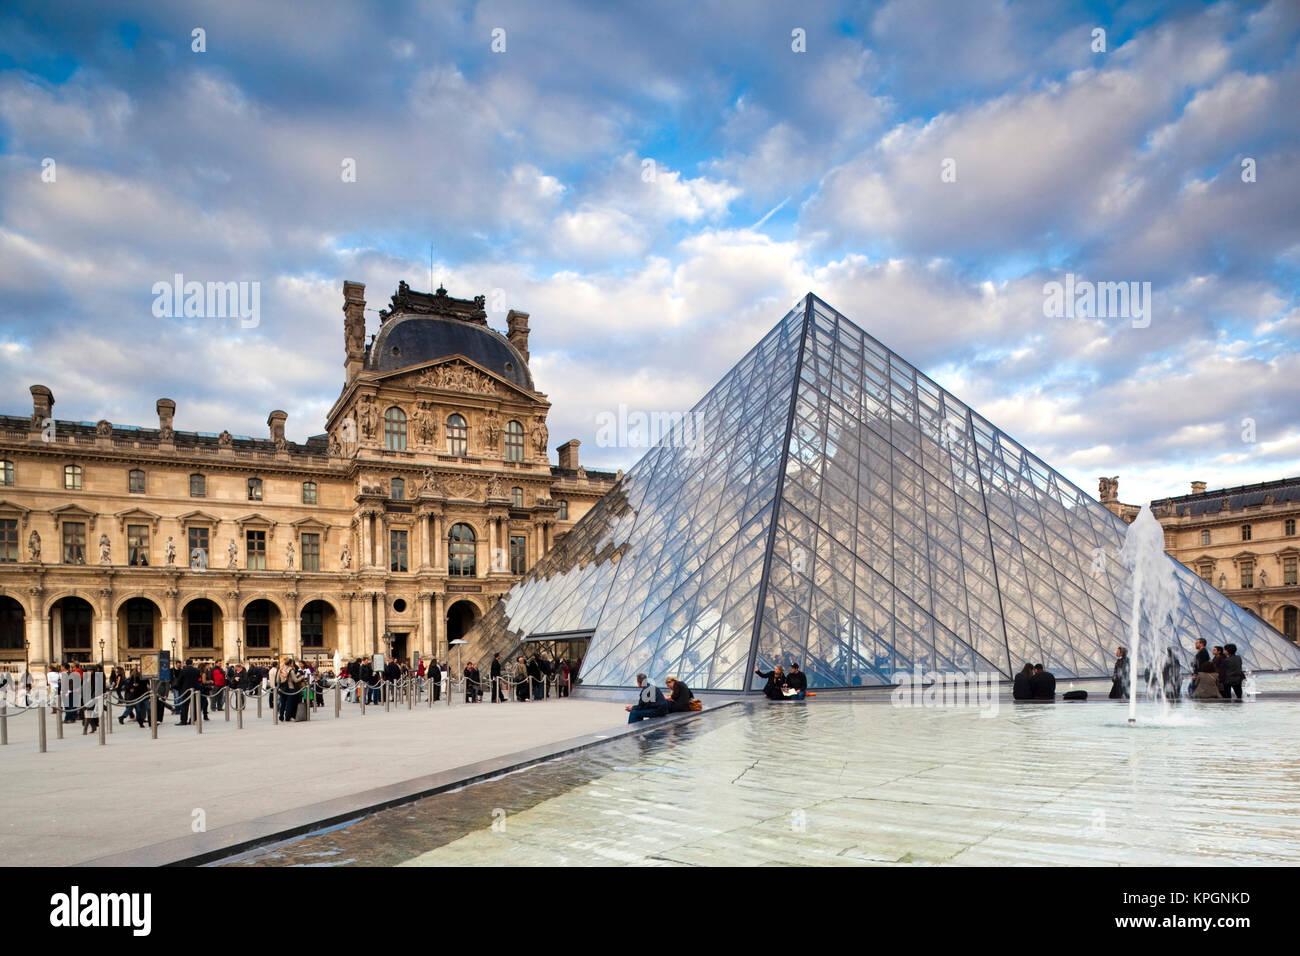 France, Paris, Musee du Louvre museum and the Louvre Pyramid, exterior Stock Photo